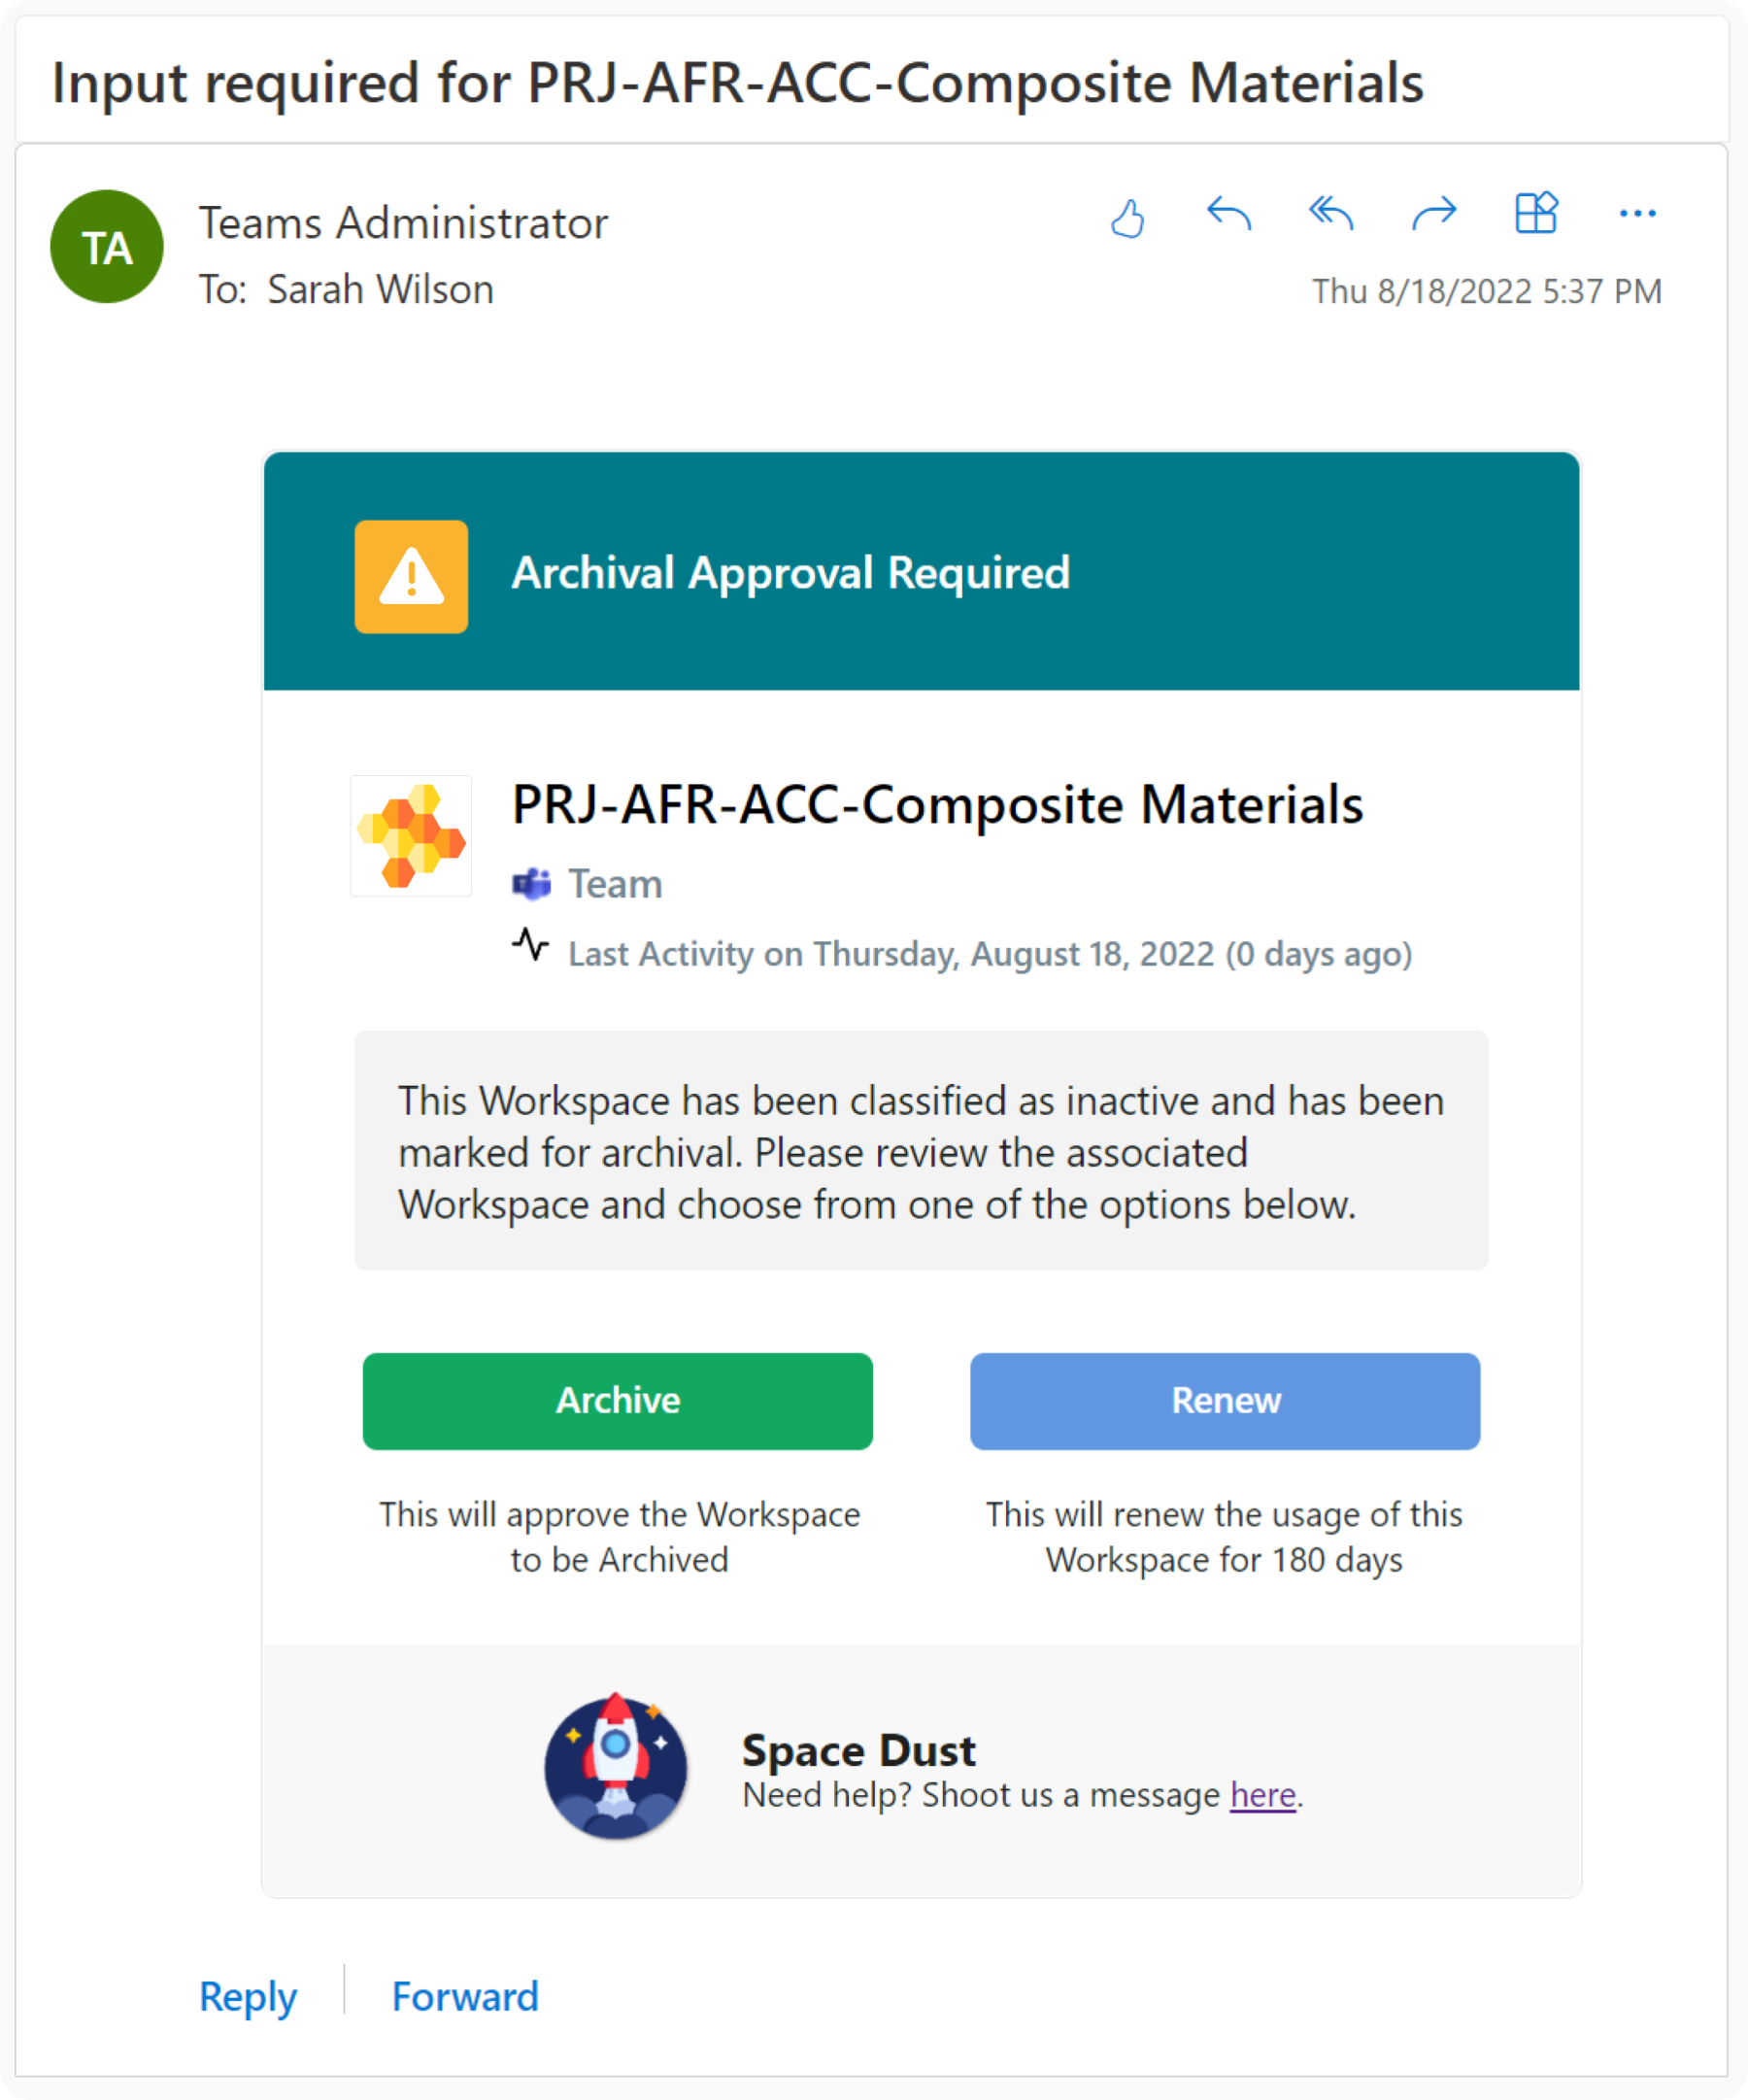 Orchestry's automated Microsoft Teams archiving notification